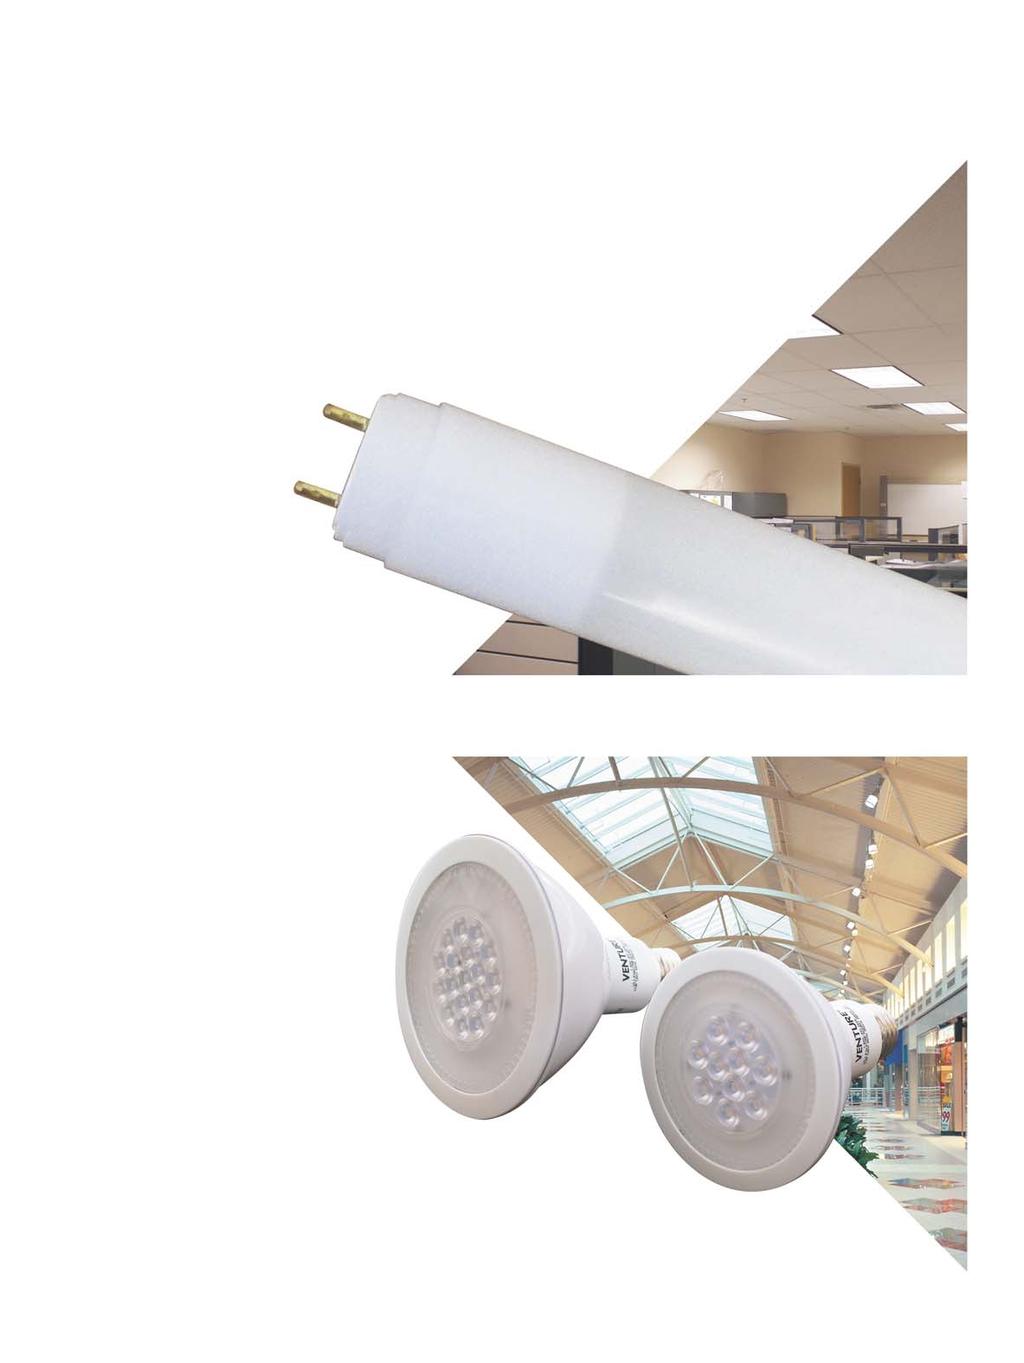 LED T8 RETROFIT L AMPS Venture Lighting s T8 LED retrofit lamps use up to half the energy and offer up to twice the life compared to standard T8 fluorescent.